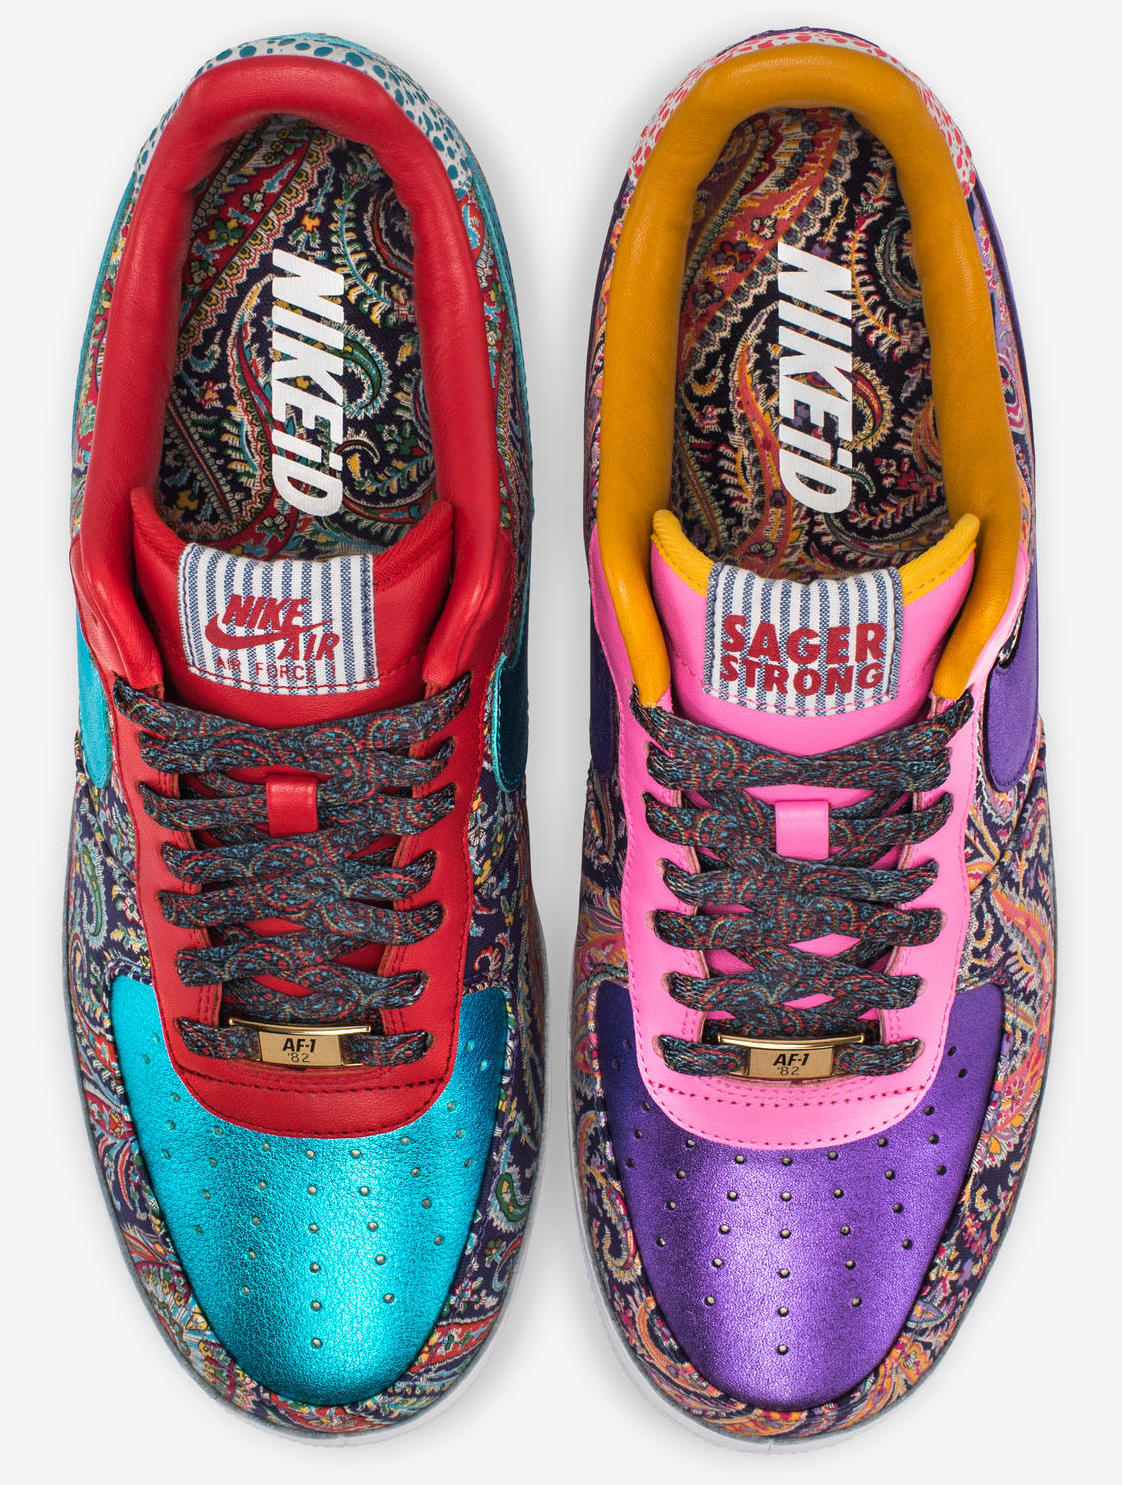 Nike Air Force 1 Bespoke &quot;Sager Strong&quot;